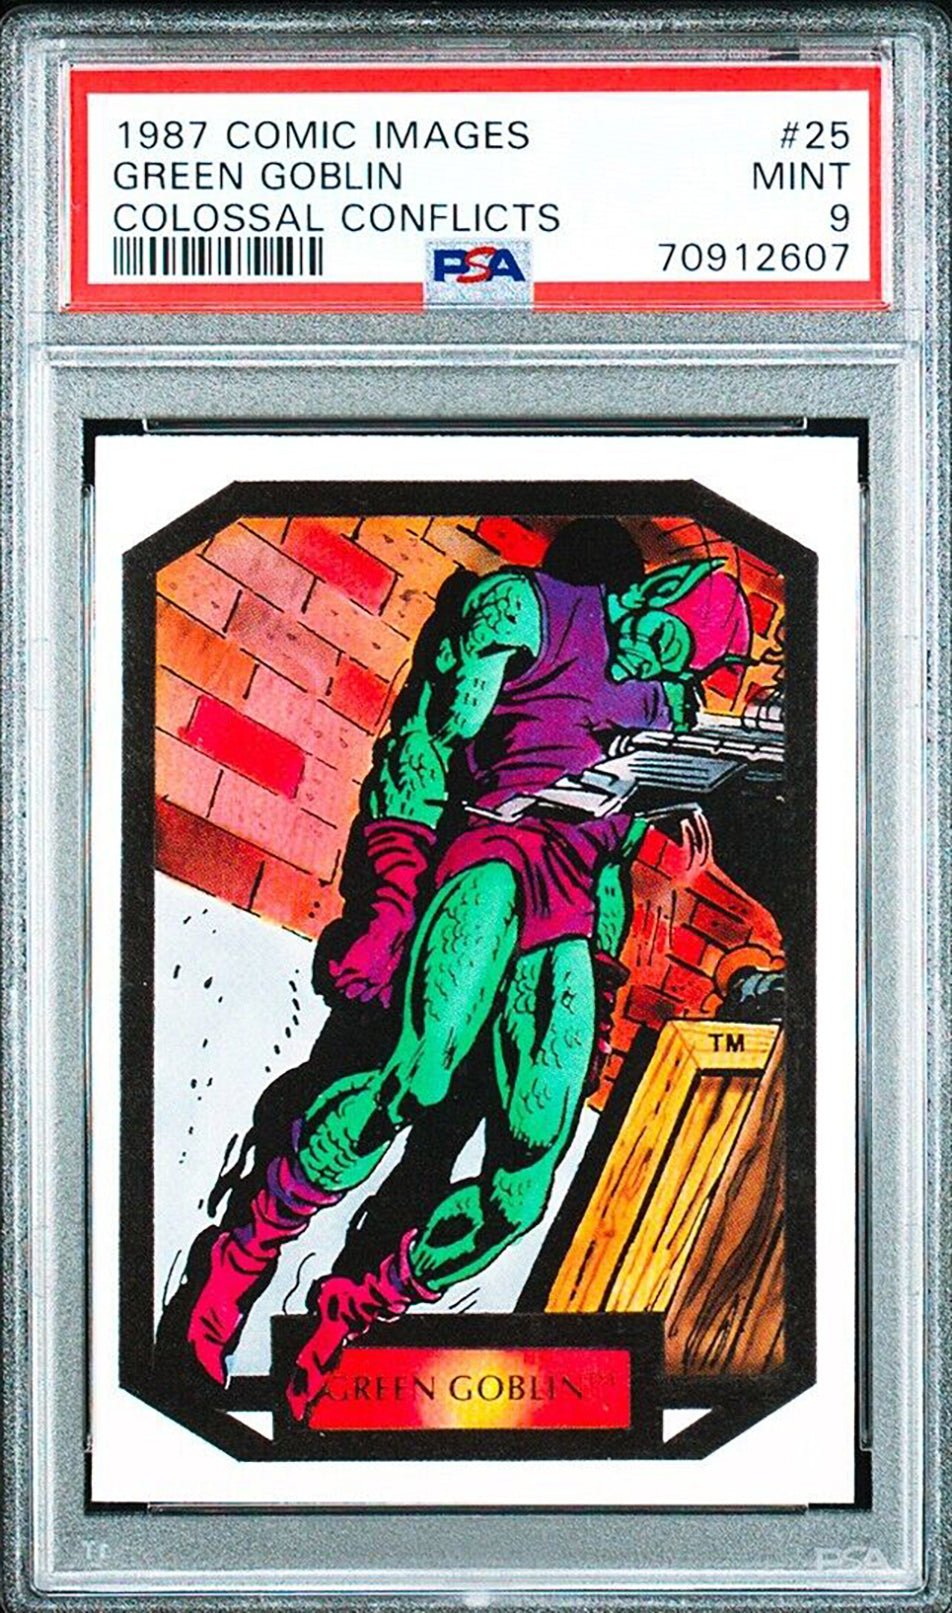 GREEN GOBLIN PSA 9 1987 Comic Images Colossal Conflicts #25 Marvel Base Graded Cards - Hobby Gems